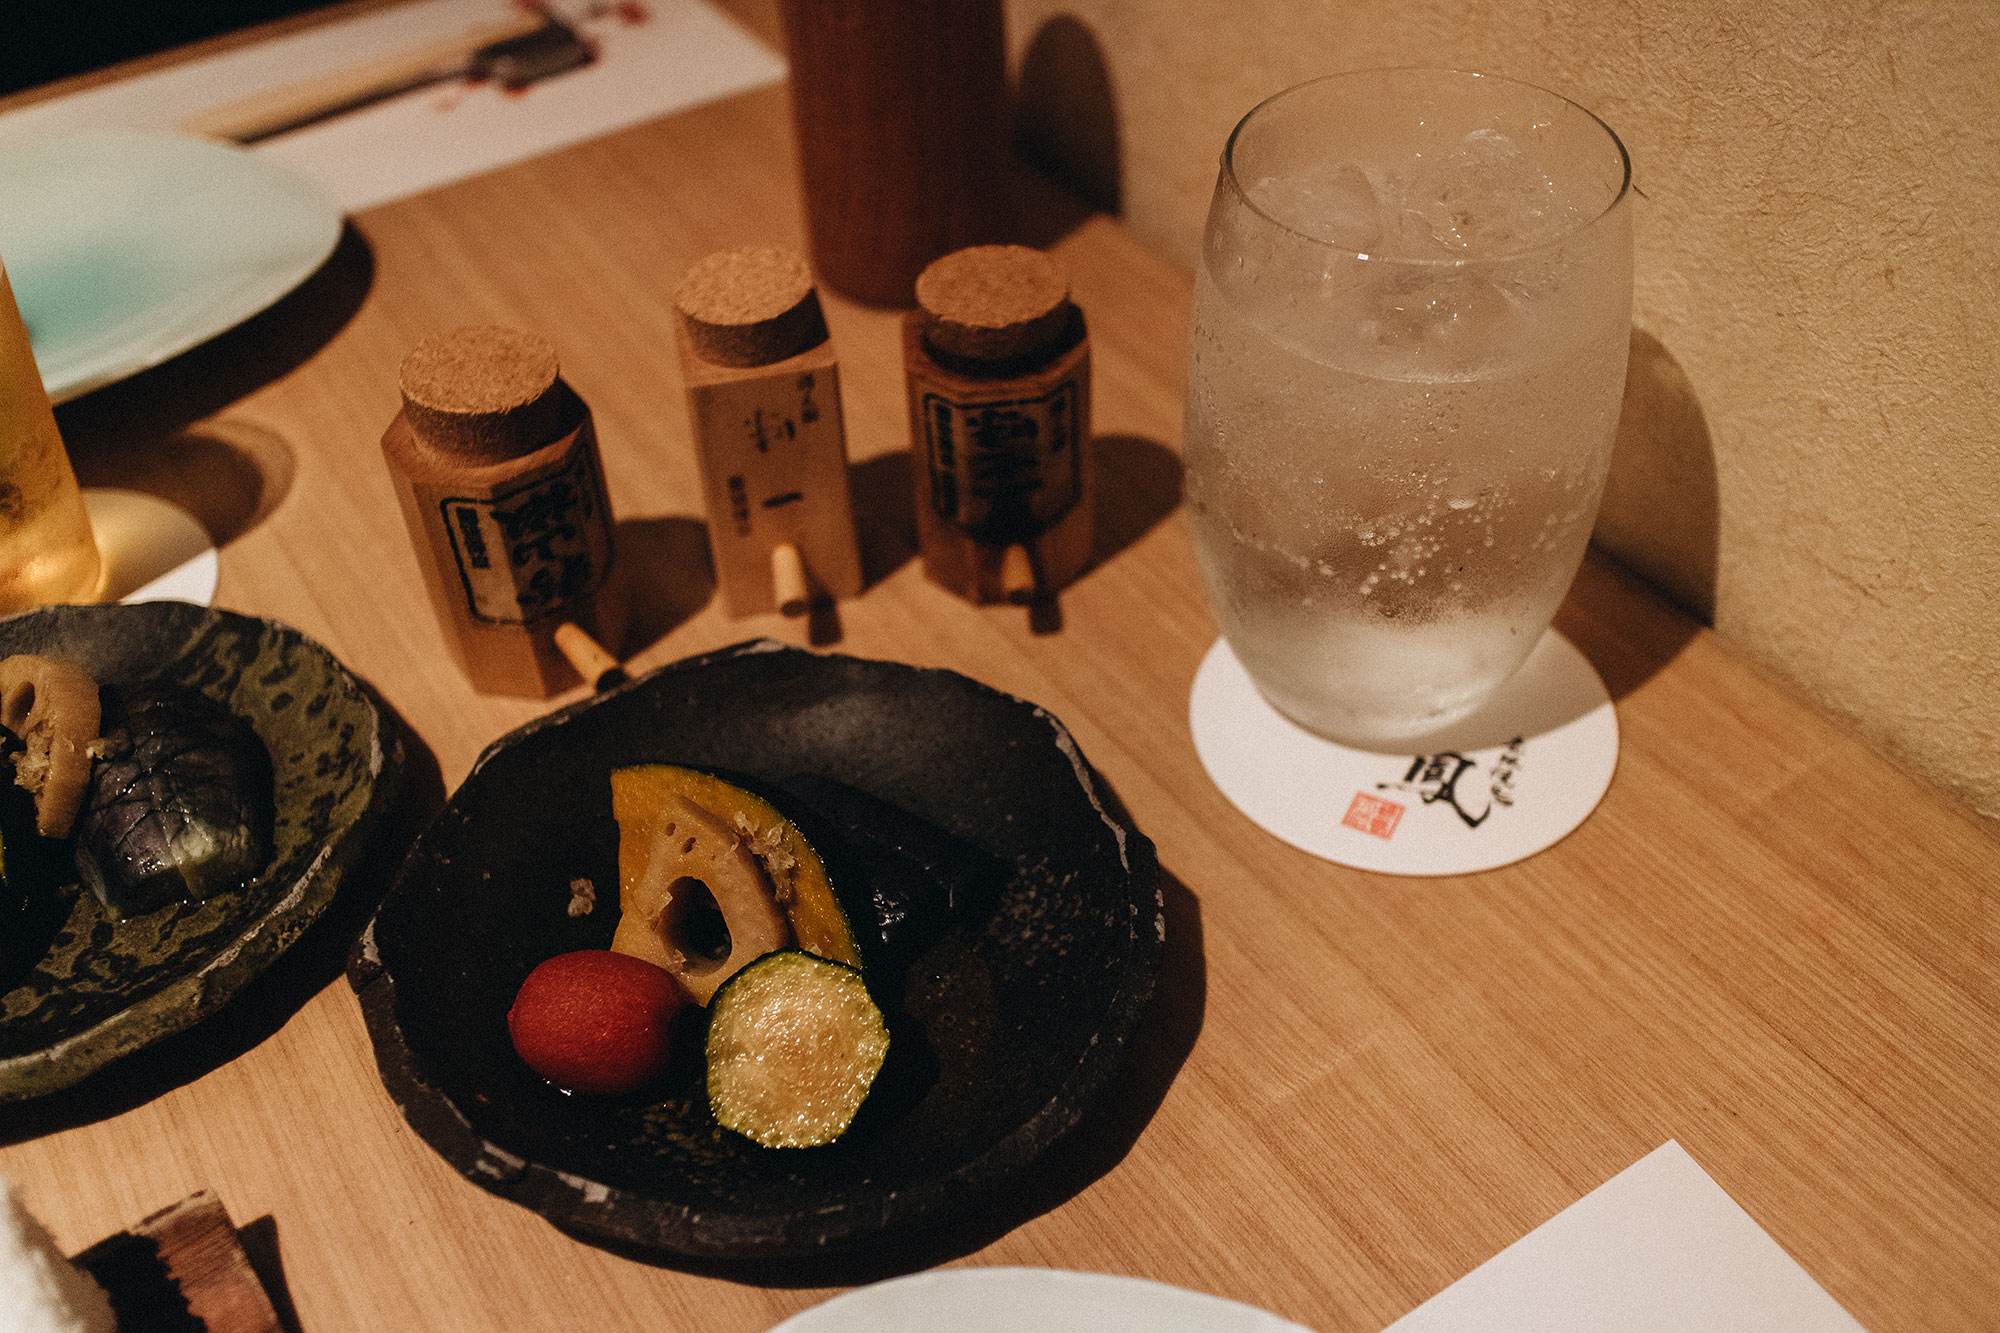 Tokyo Bar Guide w/ Haku Vodka - 5 Bars to have a drink in Tokyo / iHeartAlice.com - Travel, Lifestyle & Foodblog by Alice M. Huynh / Tokyo Travel Guide